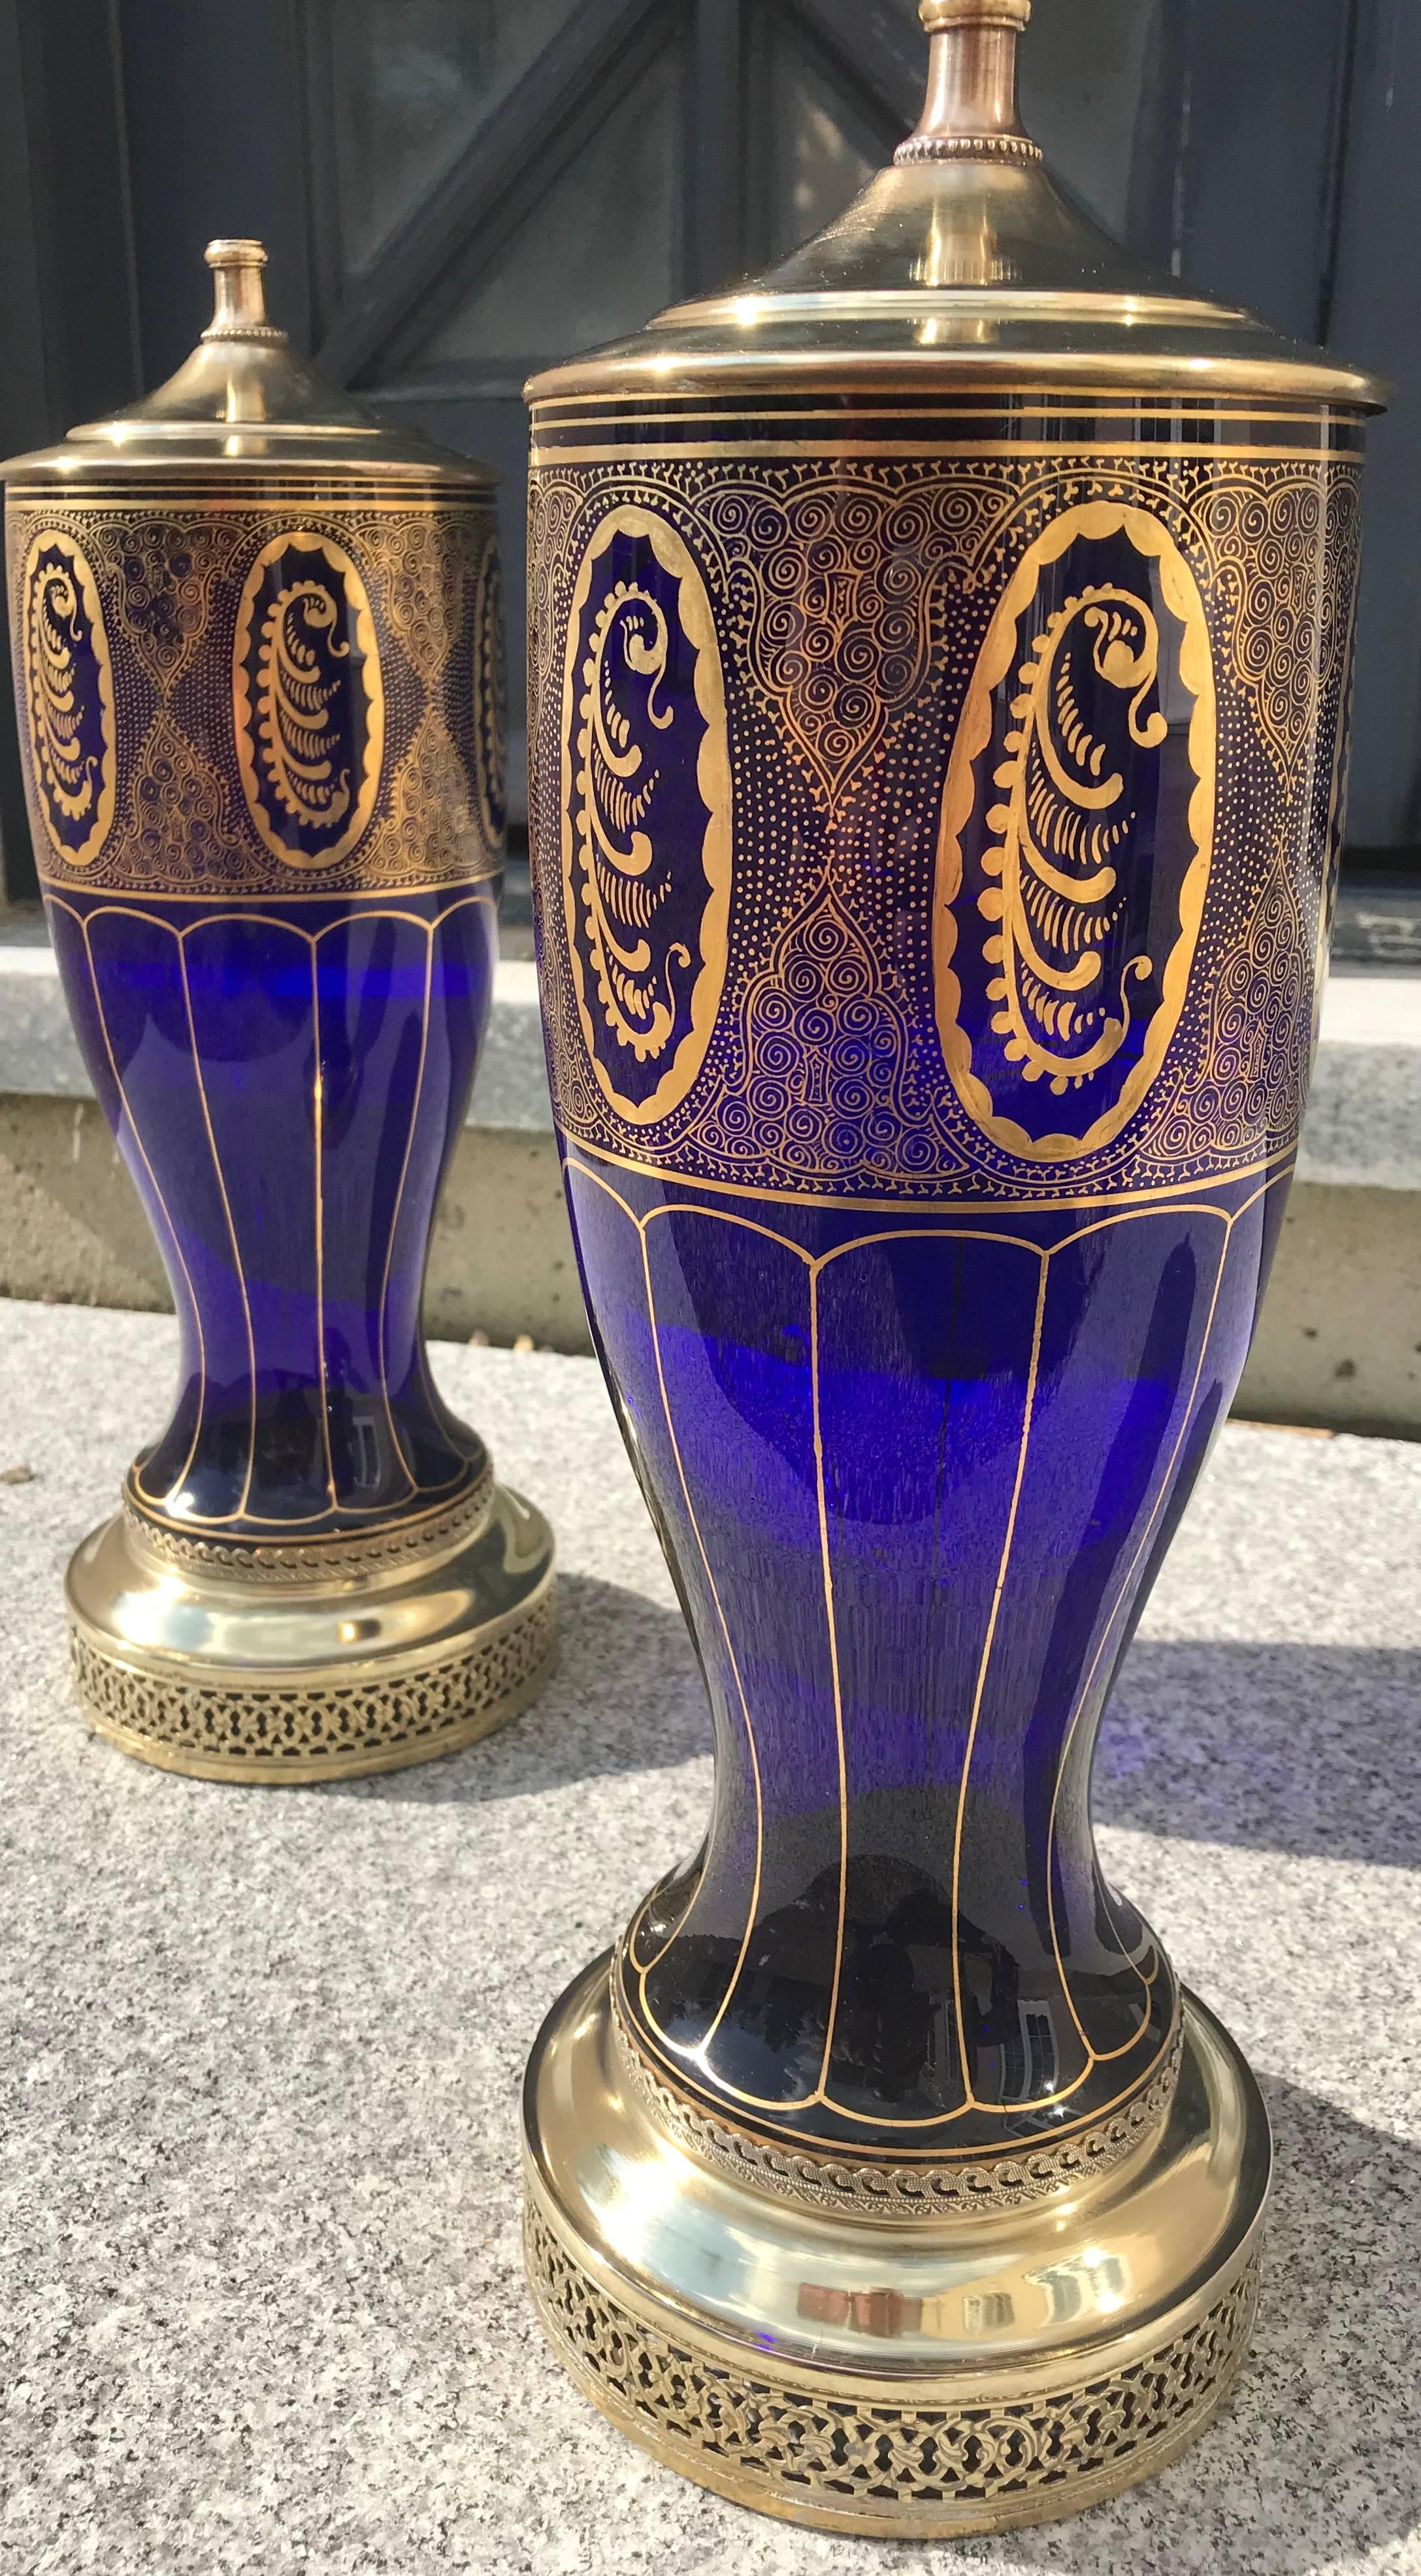 This elegant pair of handblown cobalt blue glass vases were converted into lamps in the 1930s. The gold patterns are hand applied in 24-karat gold. The lamps with tops measure 29